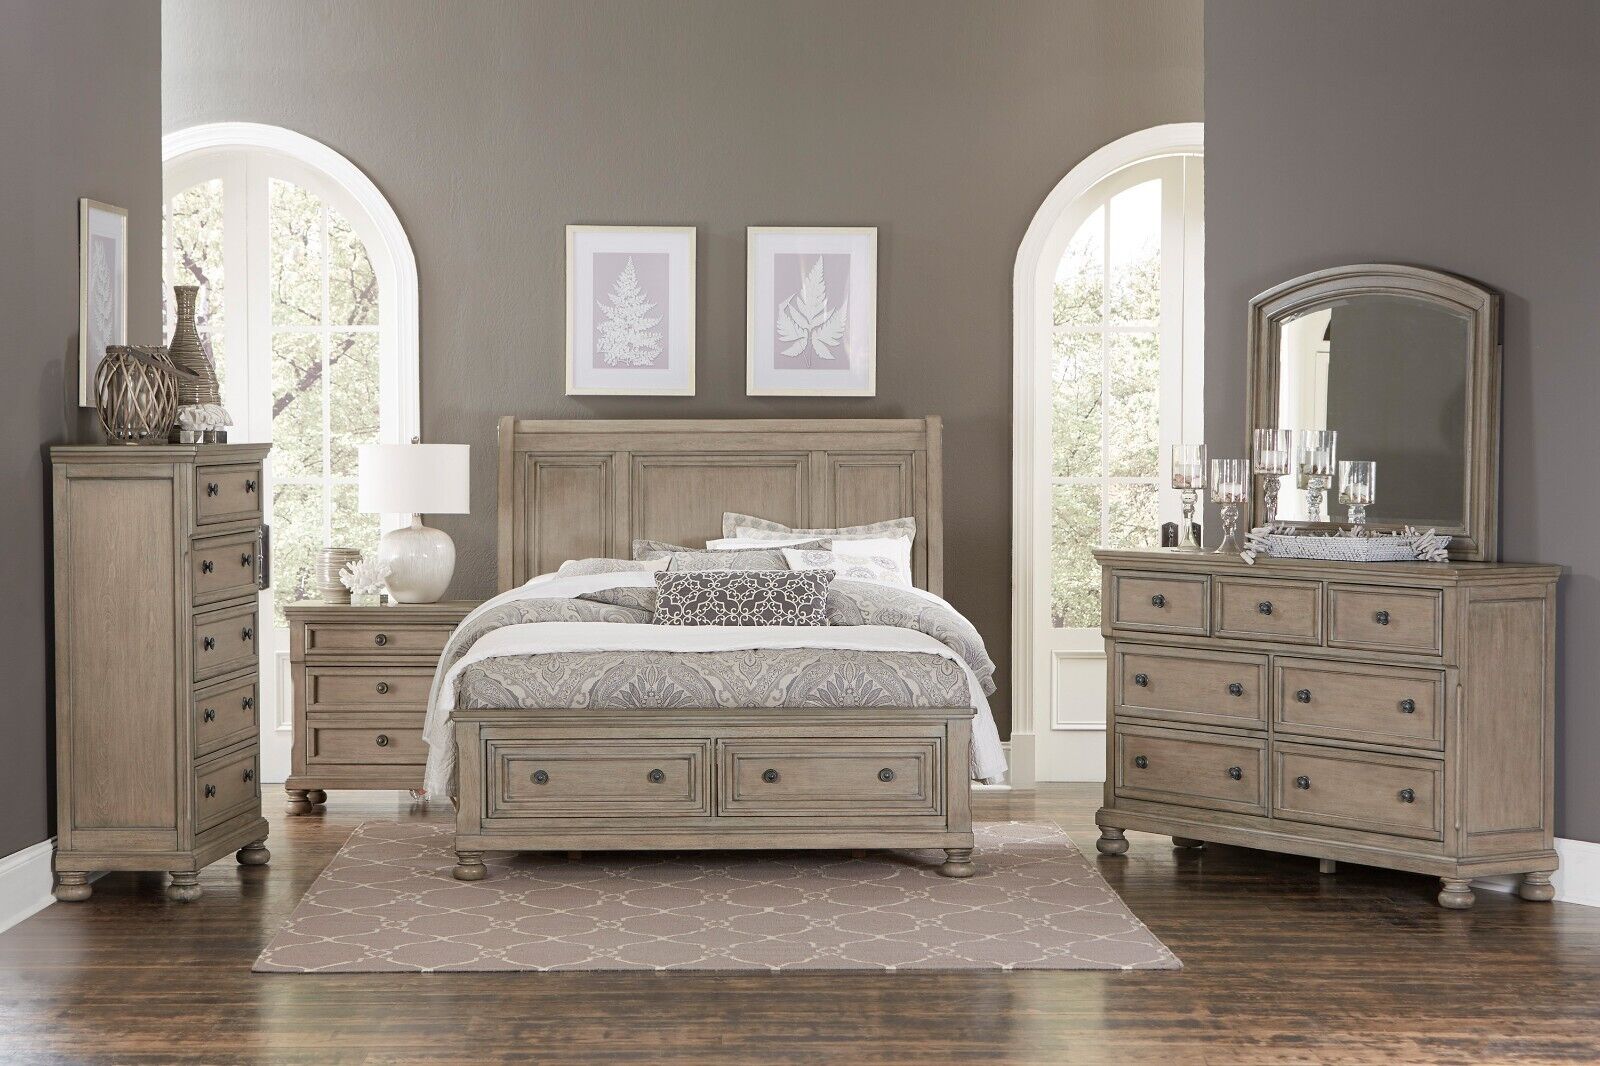 Esofastore Traditional Accent 5pc Bedroom Furniture Set King Bed w Drawers Dresser Mirror Chest Nightstand Hidden Drawers Storage